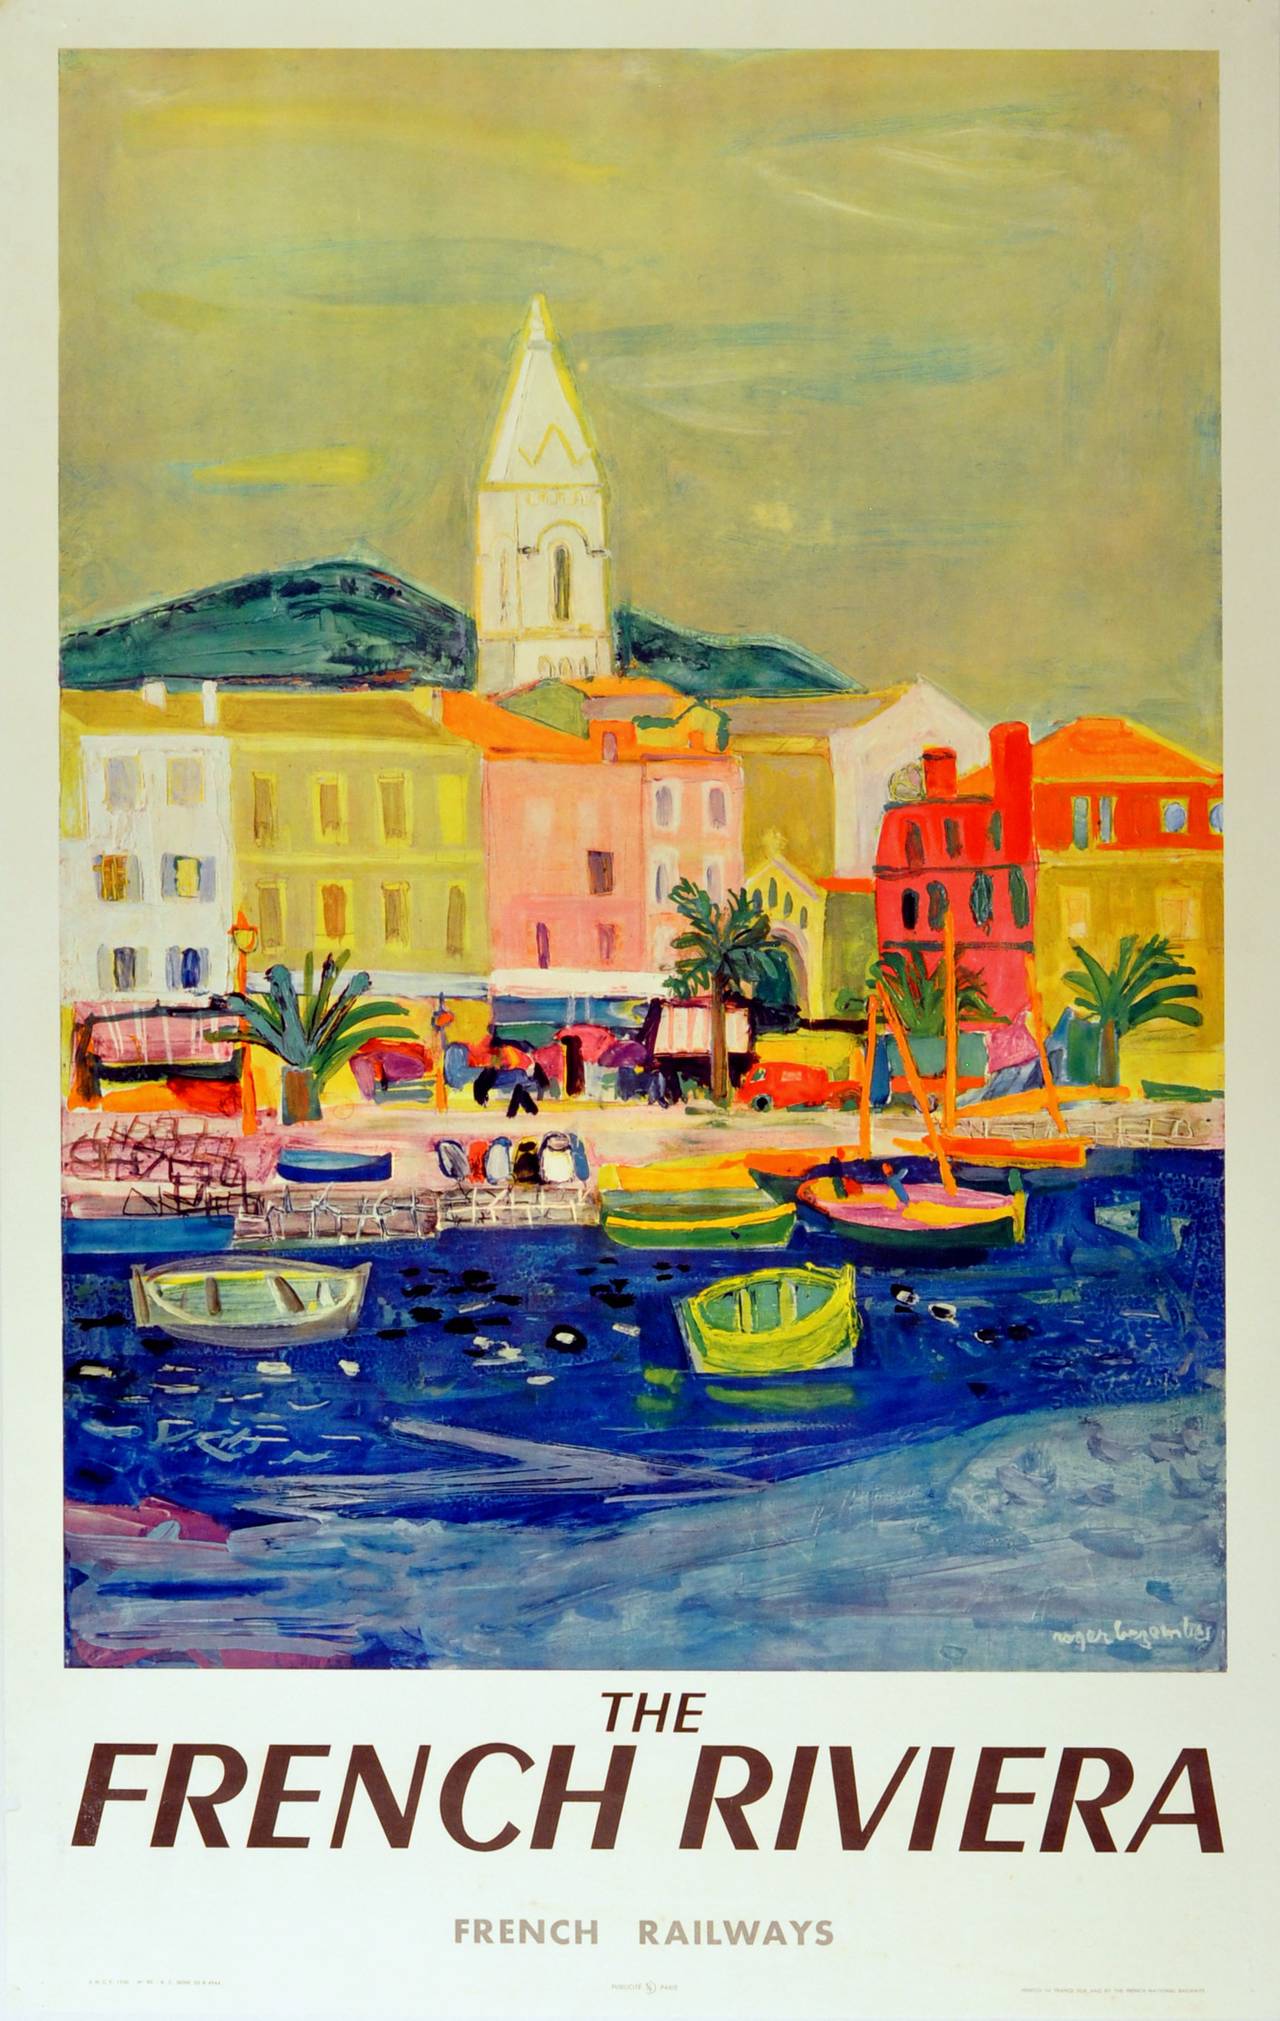 TX01 Vintage 1950's Visit France French Riviera Travel Poster Re-Print A4 